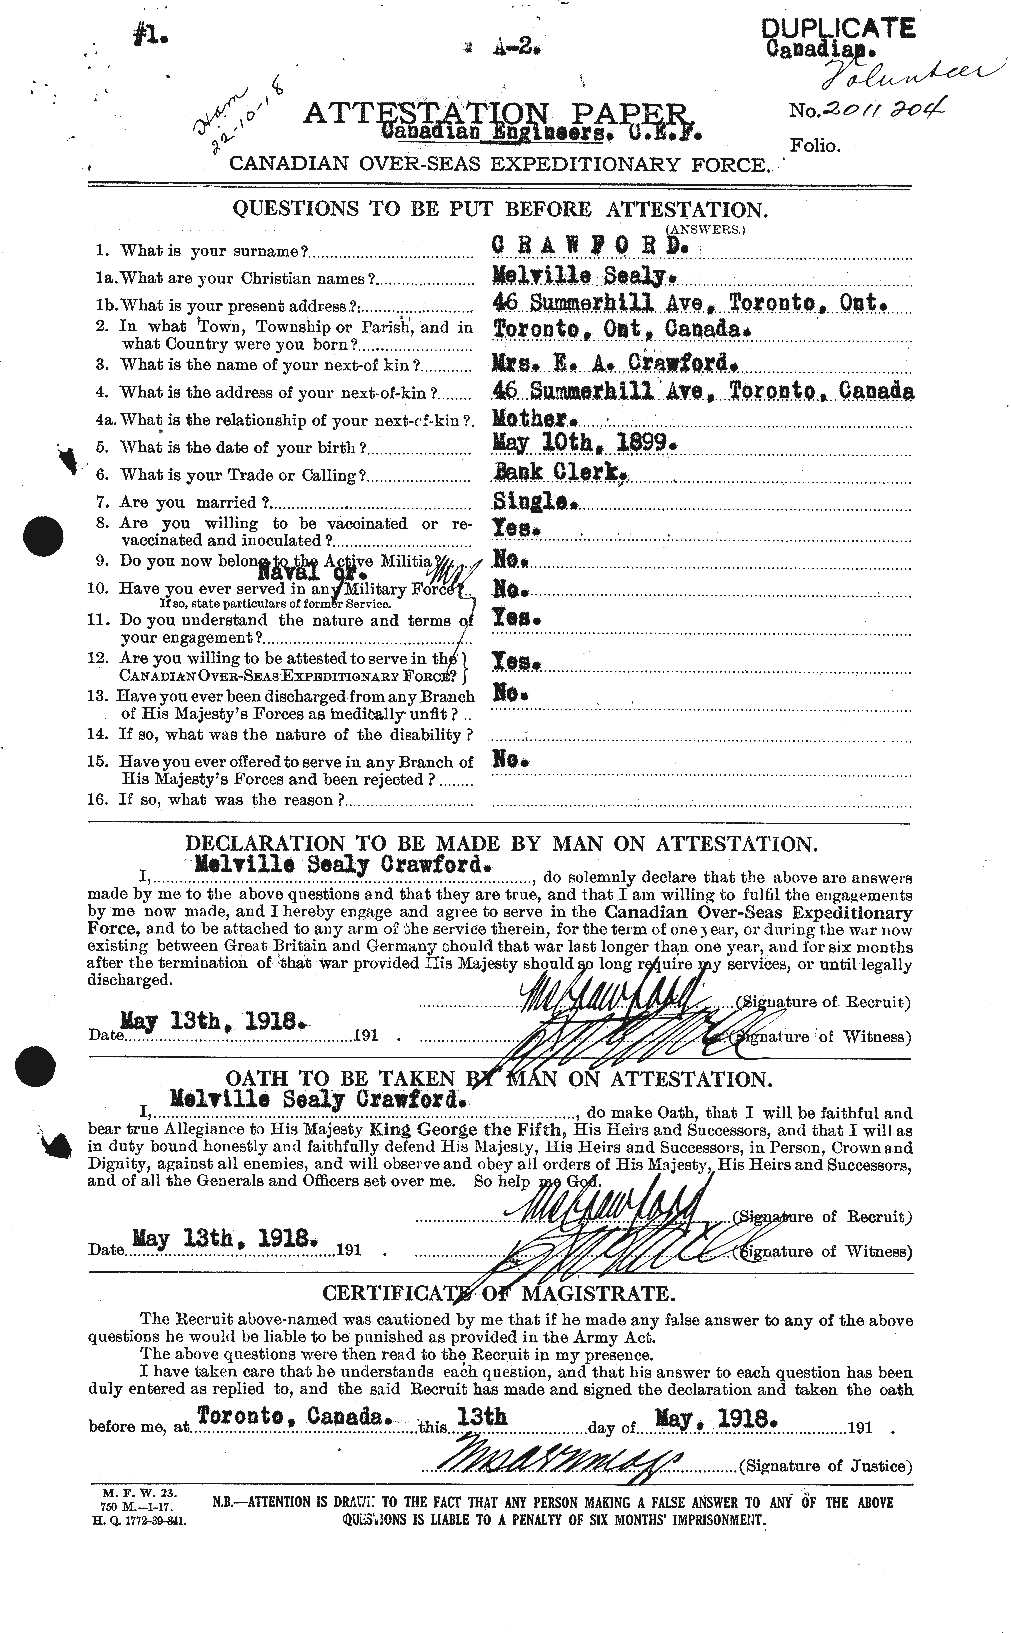 Personnel Records of the First World War - CEF 061778a